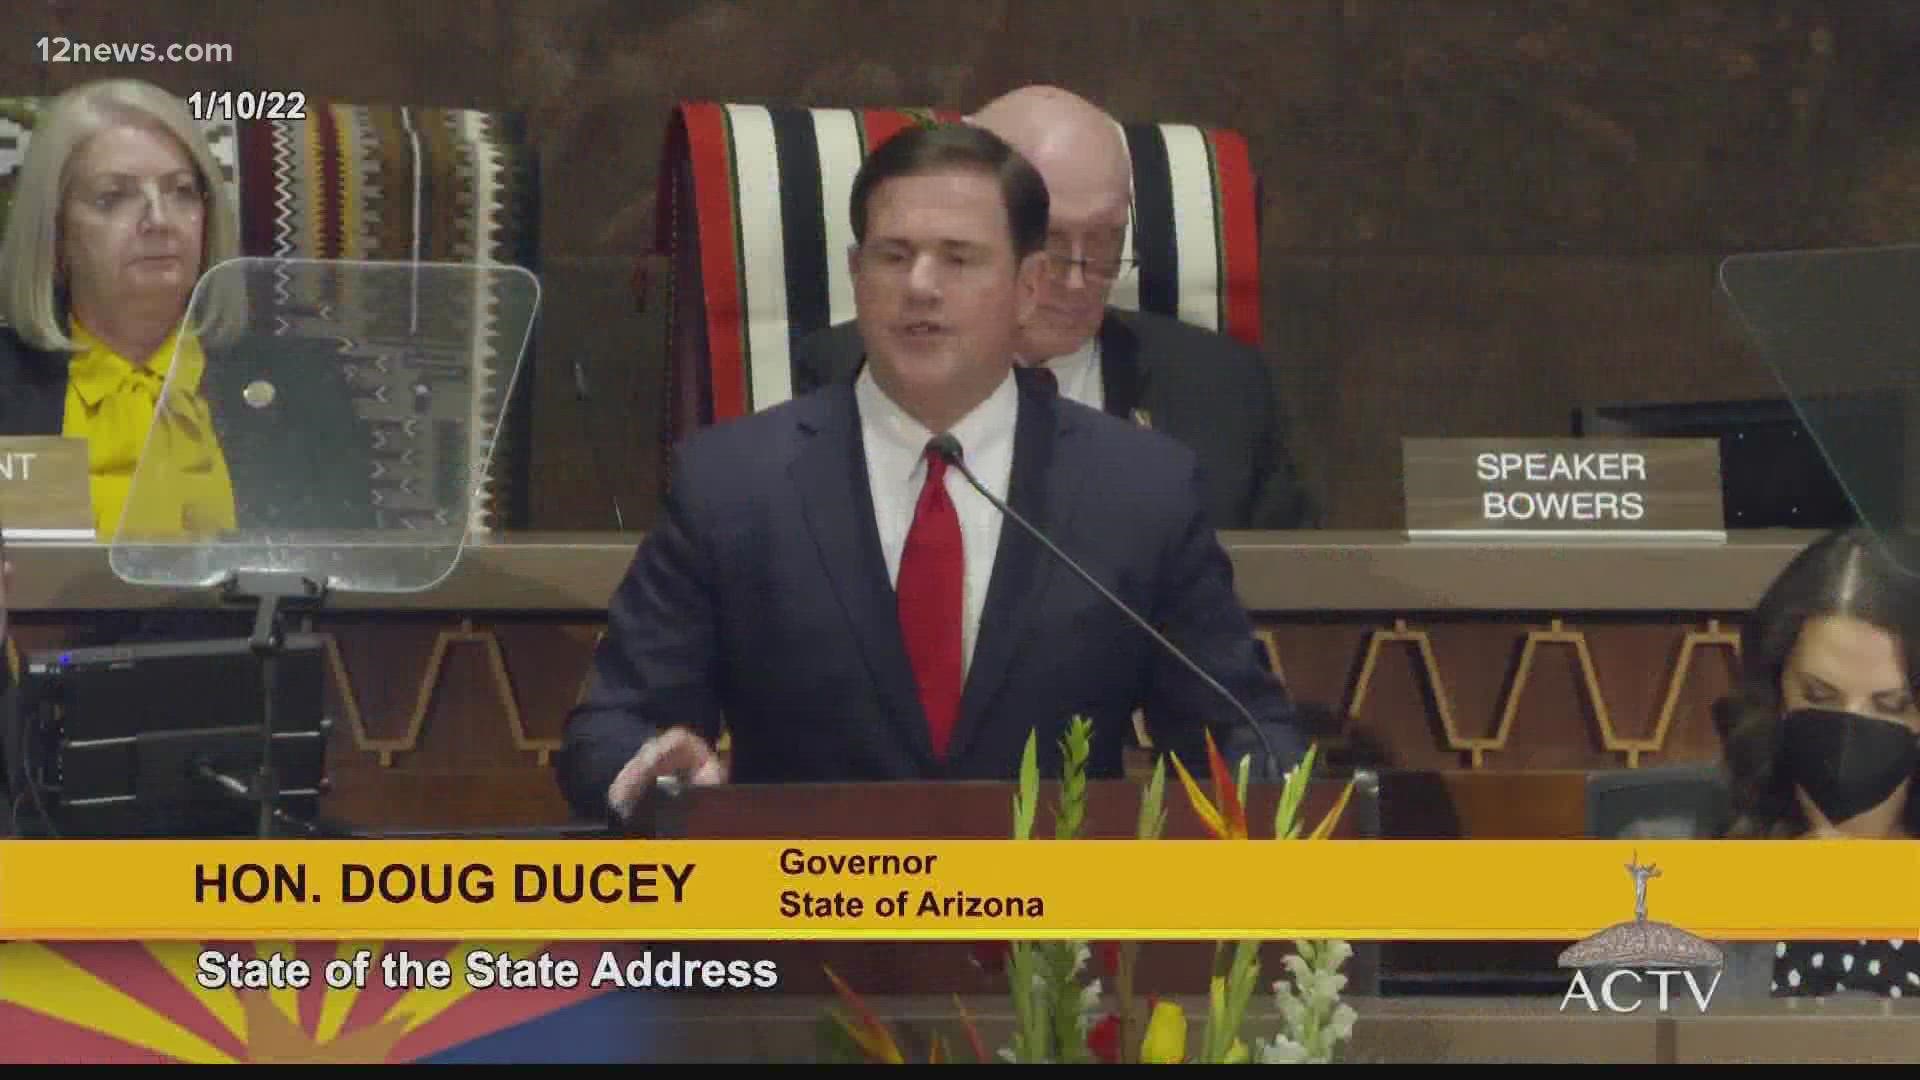 Governor Doug Ducey laid out an ambitious education agenda in his final State of the State speech. Public school educators say they were left out of it.